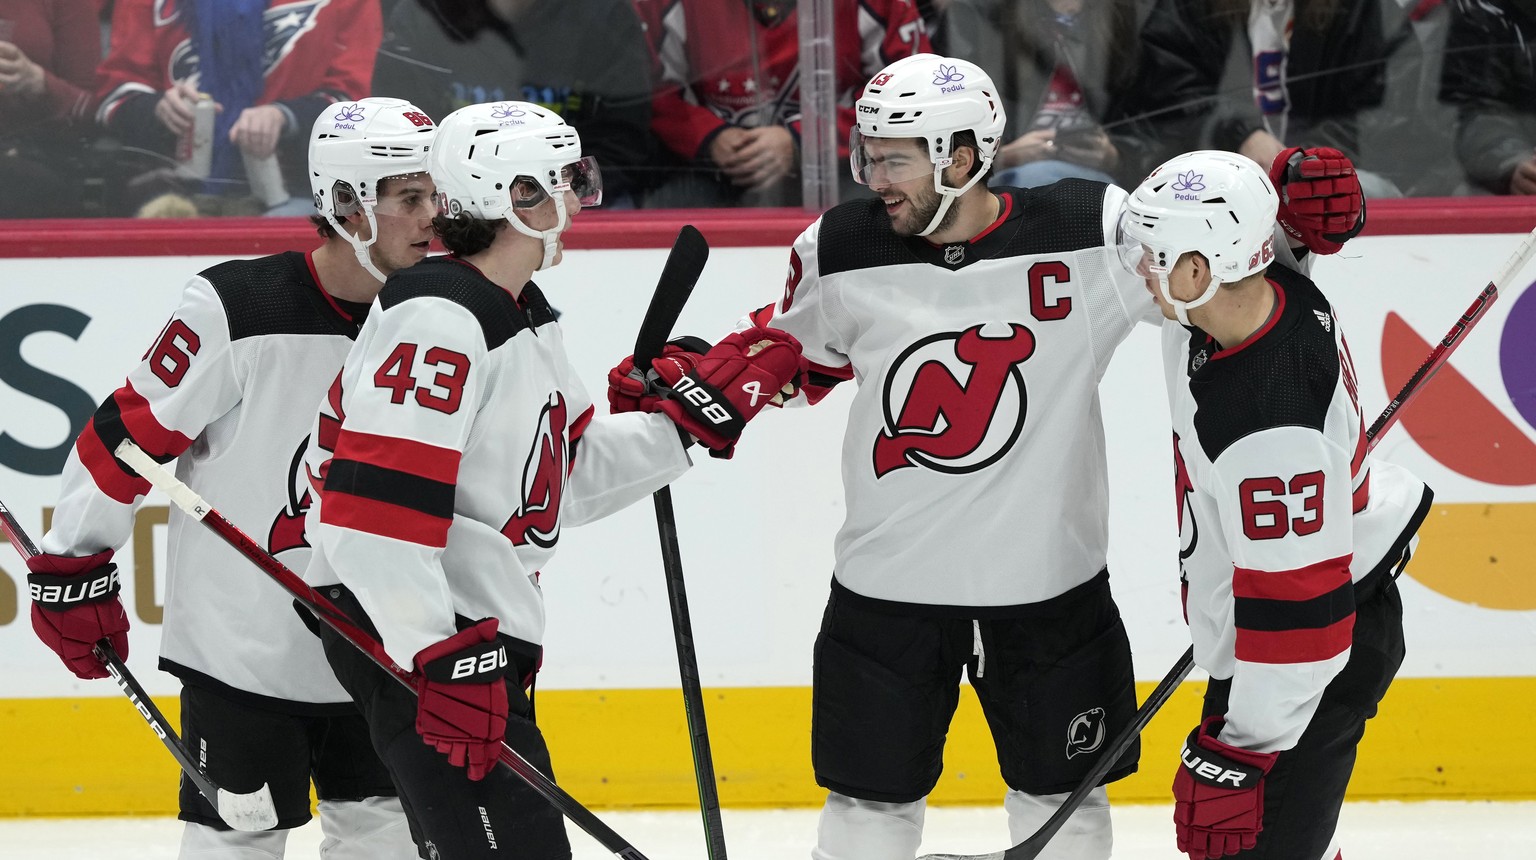 New Jersey Devils center Nico Hischier (13) is congratulated by center Jack Hughes (86), defenseman Luke Hughes (43) and left wing Jesper Bratt (63) after scoring his second goal against the Washingto ...